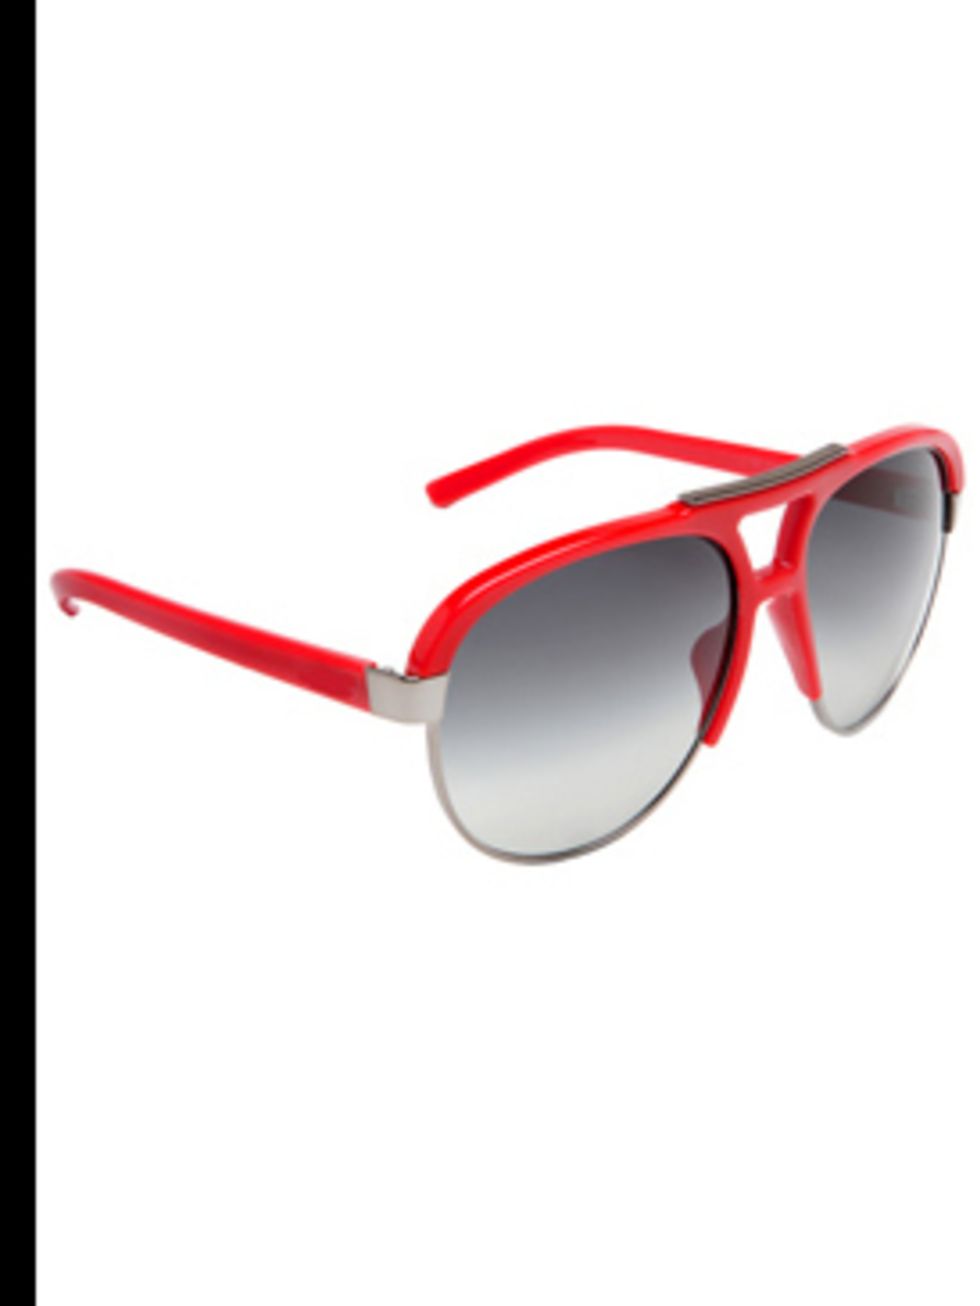 <p>6051 Sunglasses, £84.50, by D&amp;G at <a href="http://www.sunglasses-shop.co.uk/uk-sunglasses/D&amp;G-Sunglasses/D&amp;G-6051-Red/9334.htm">www.sunglasses-shop.co.uk</a></p>